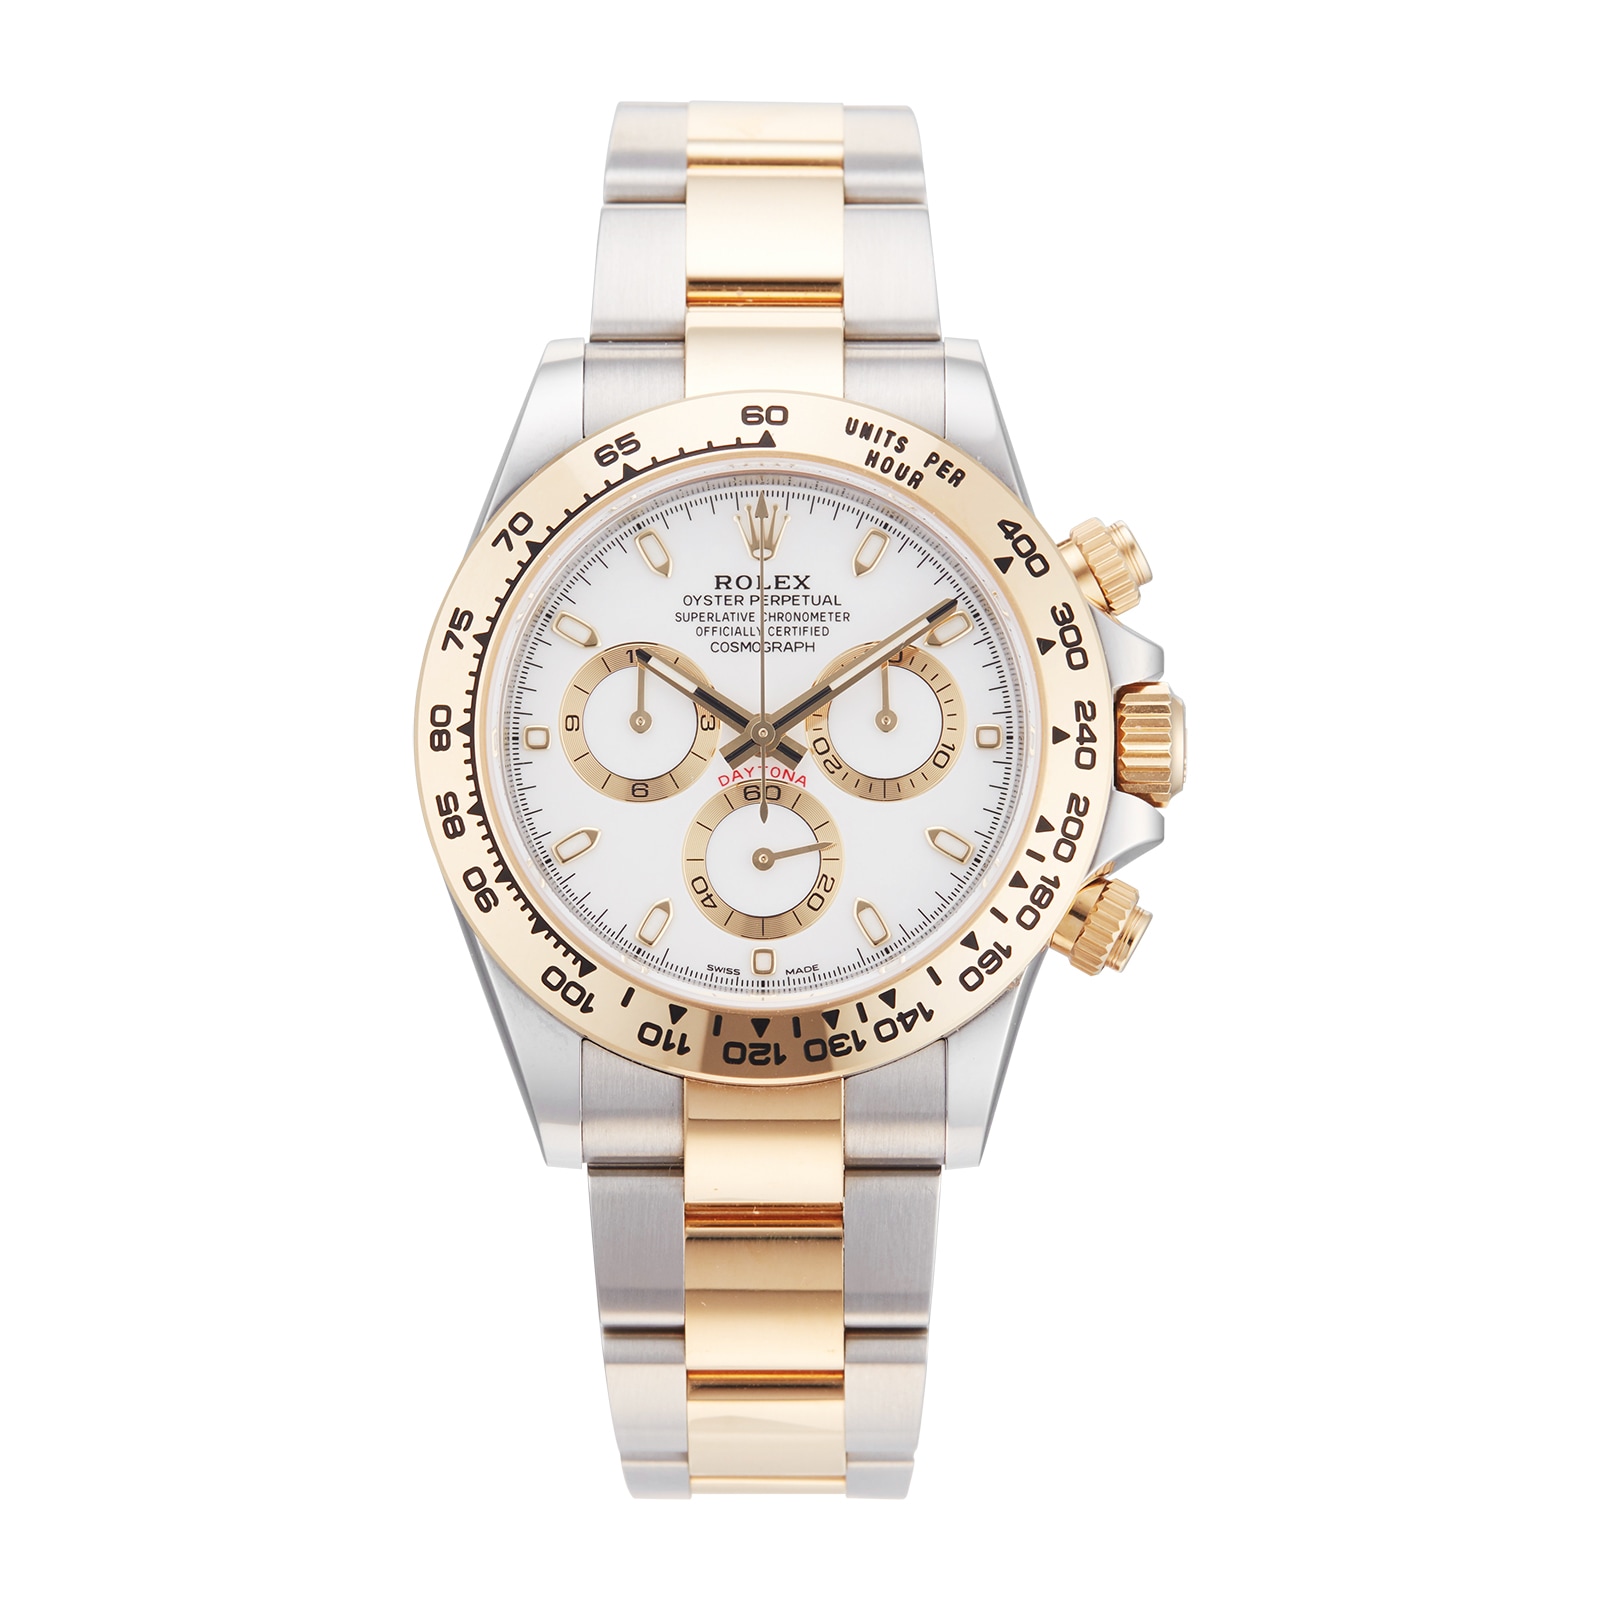 Pre-Owned Rolex Cosmograph Daytona Mens Watch 116503